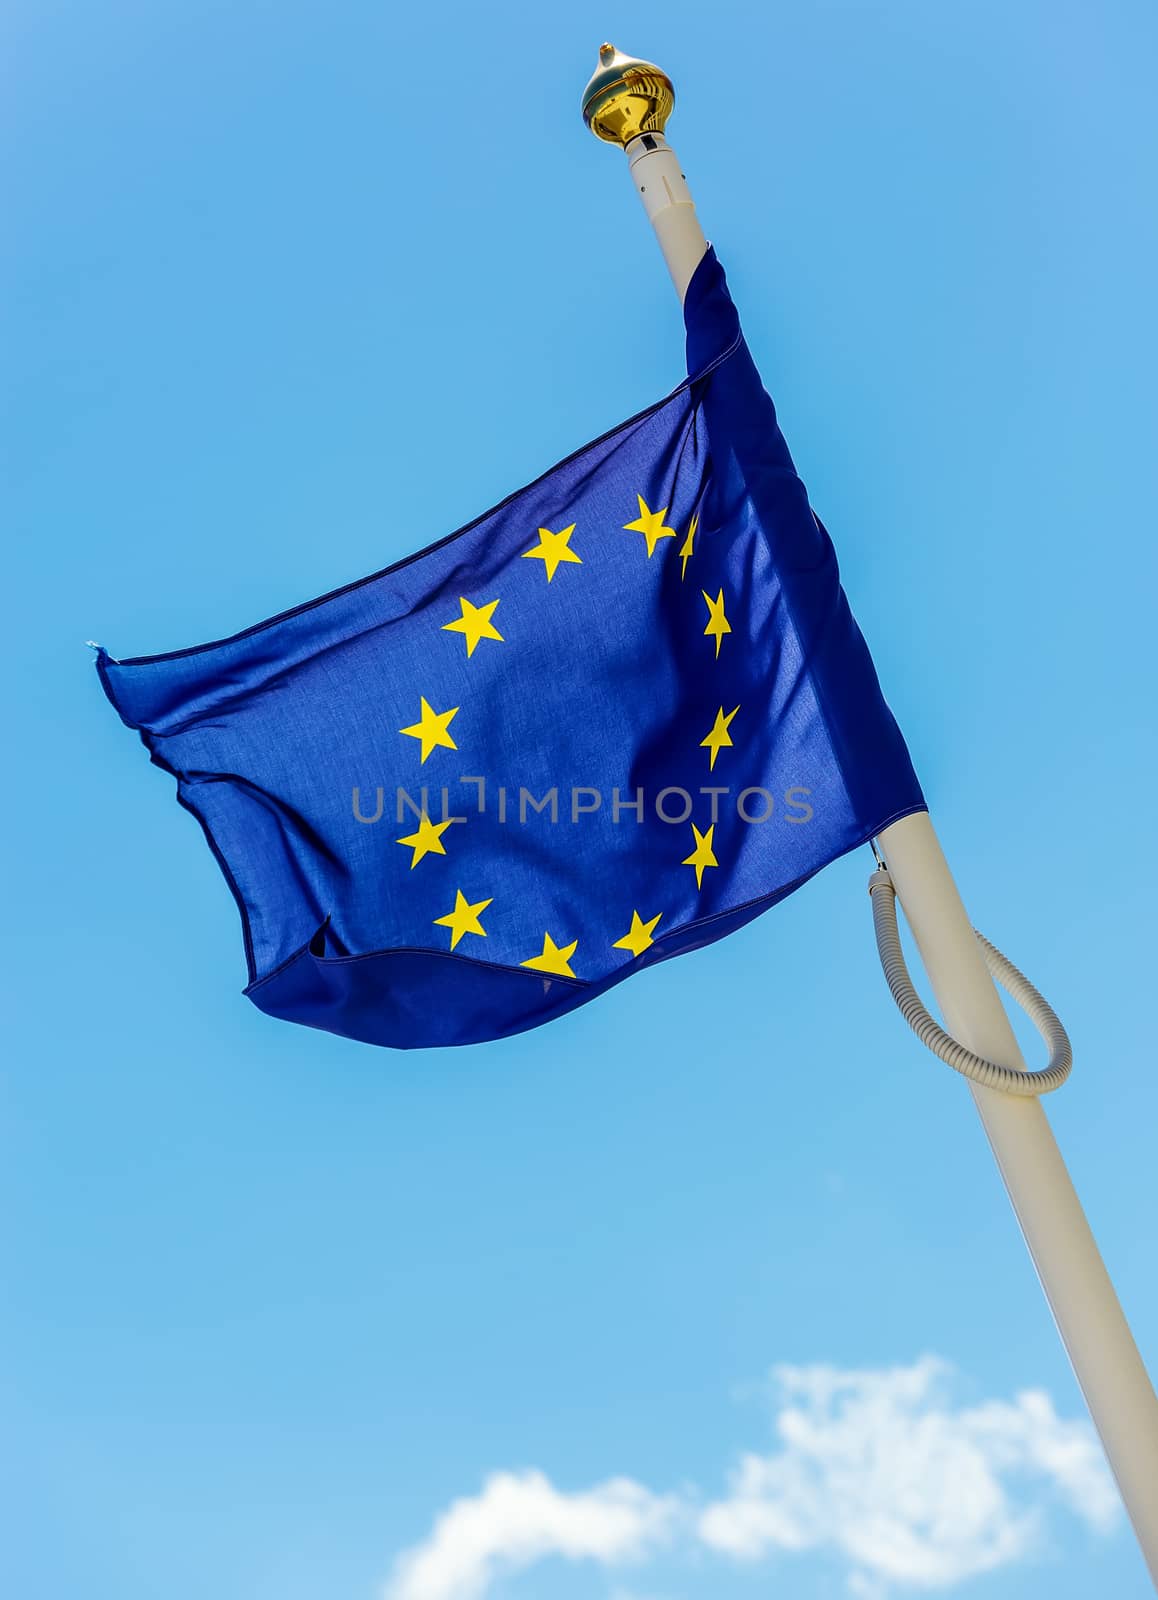 flag of the European Union with clouds underneath symbolizing darkening by pixinoo